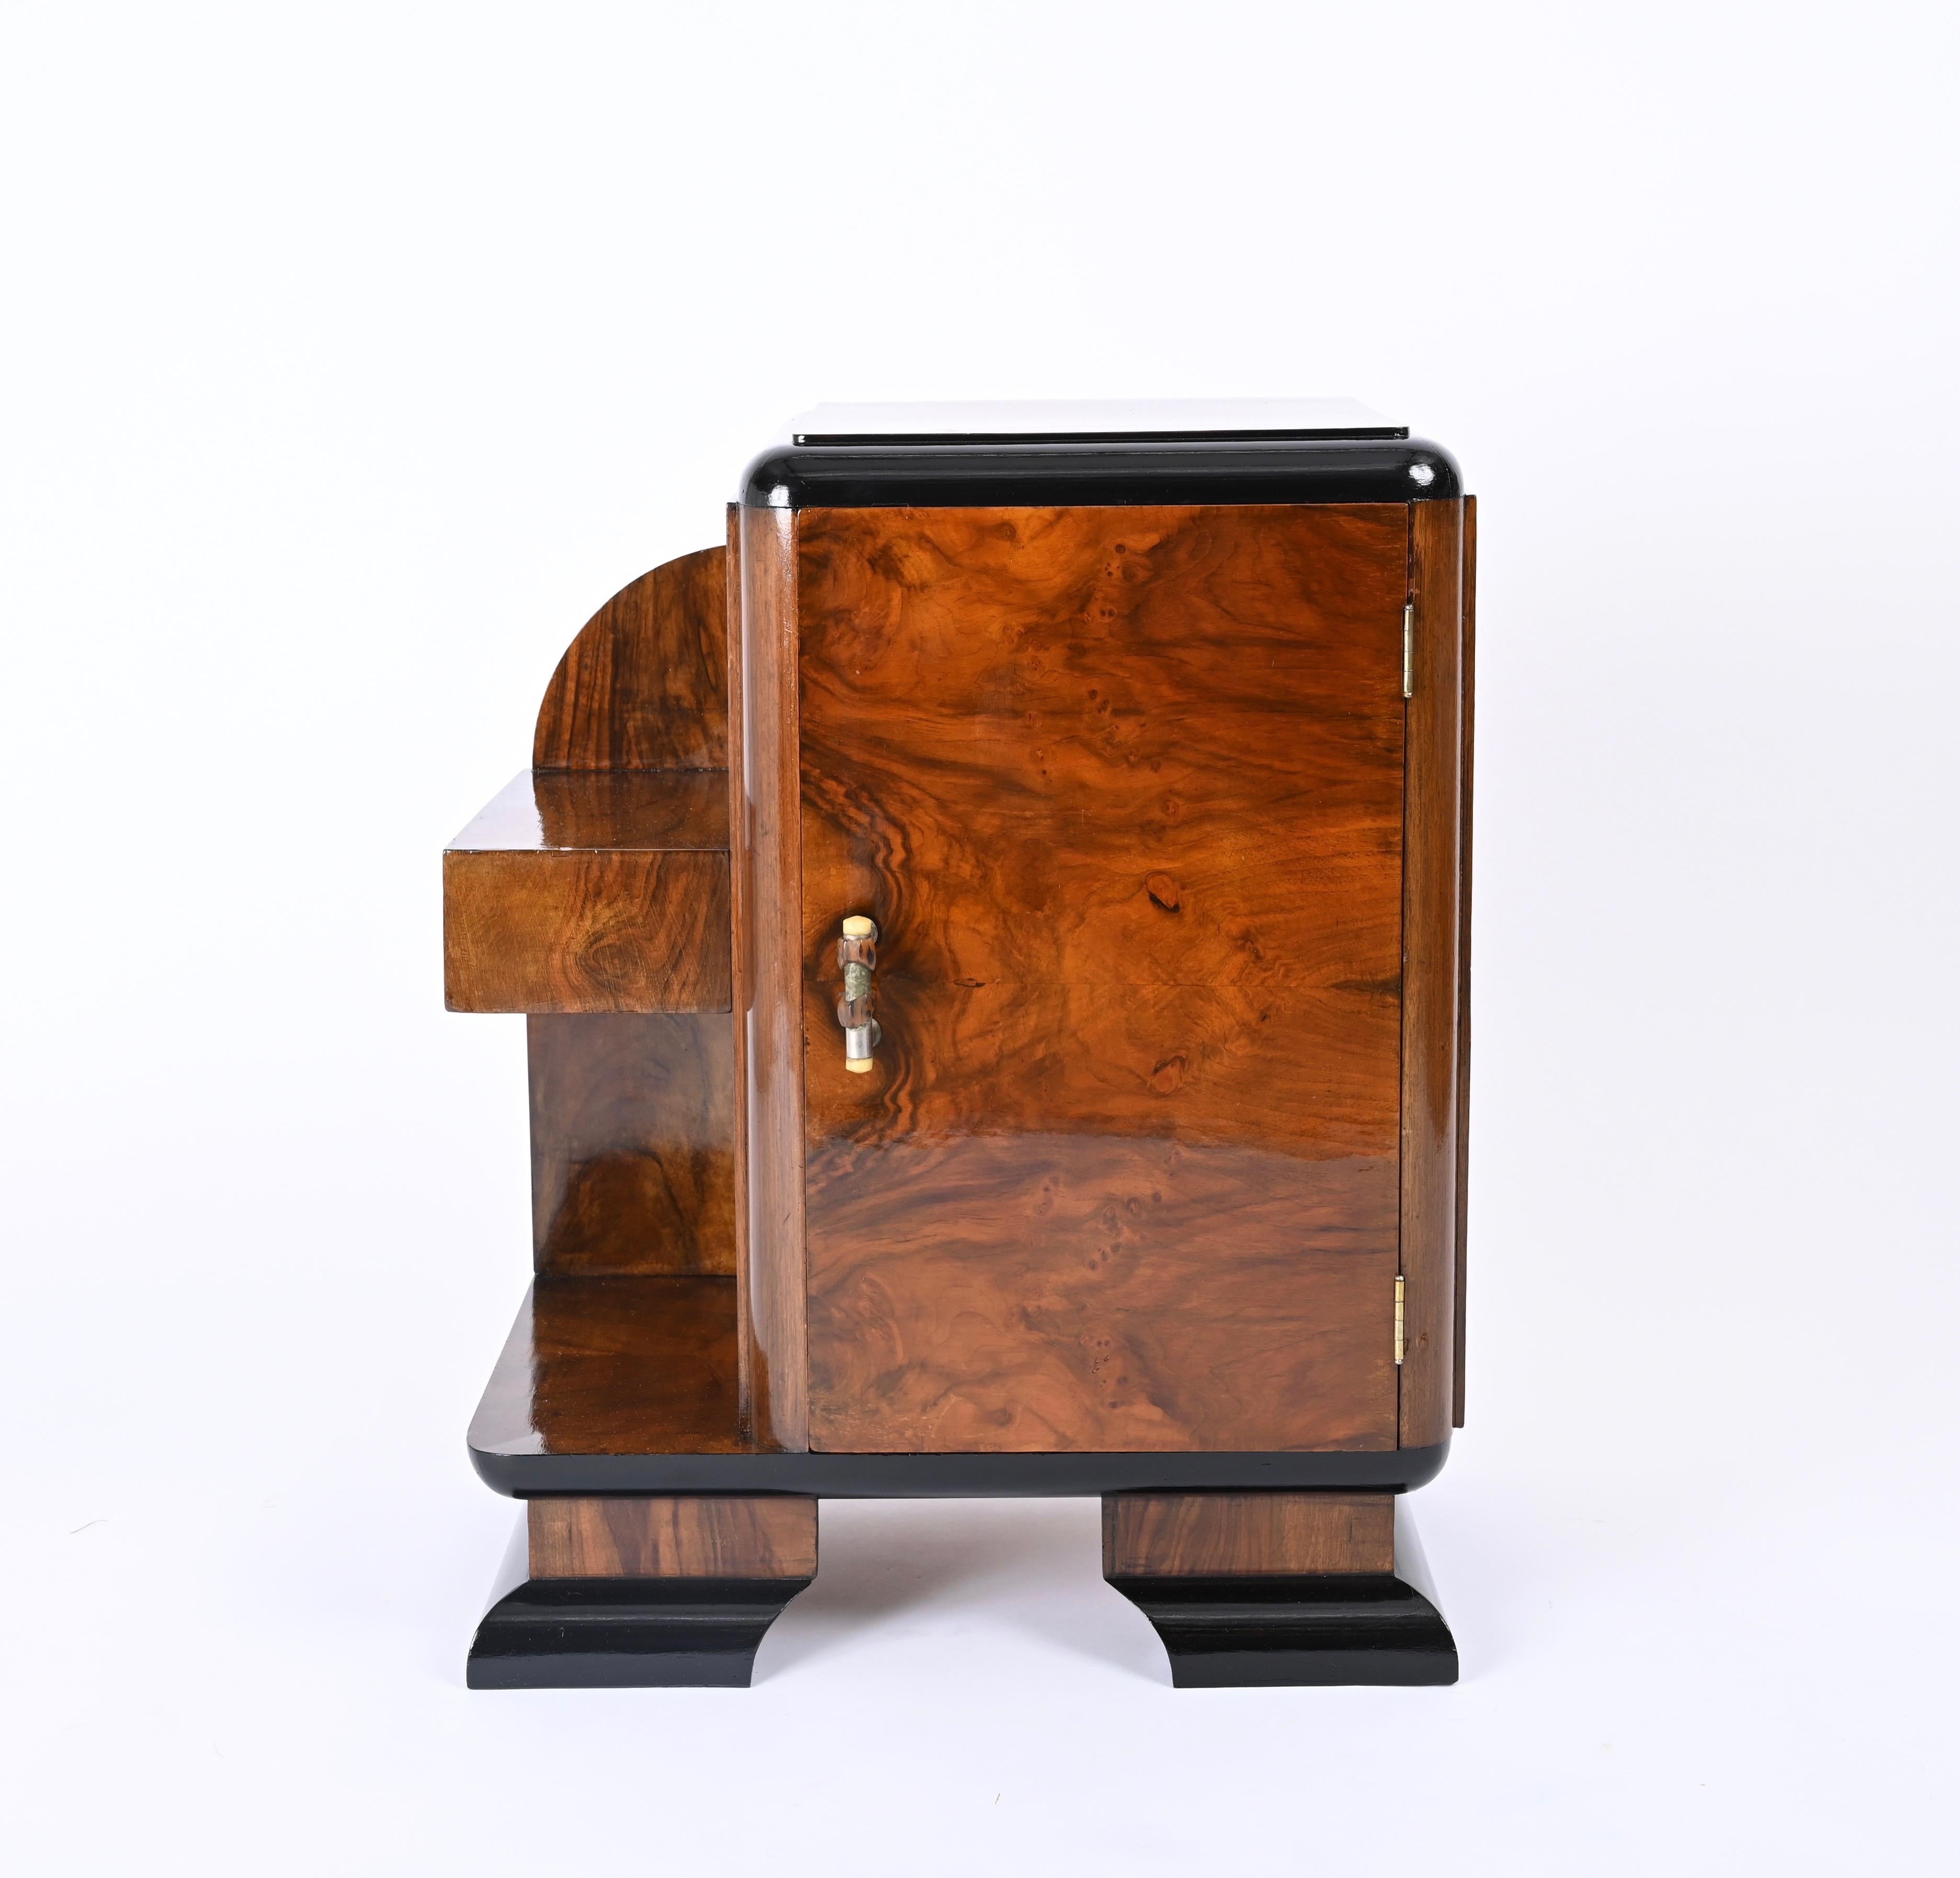 Hand-Crafted Art Deco Bedside Table, Olive Burl and Lacquered Wood, Italian Nightstand, 1930s